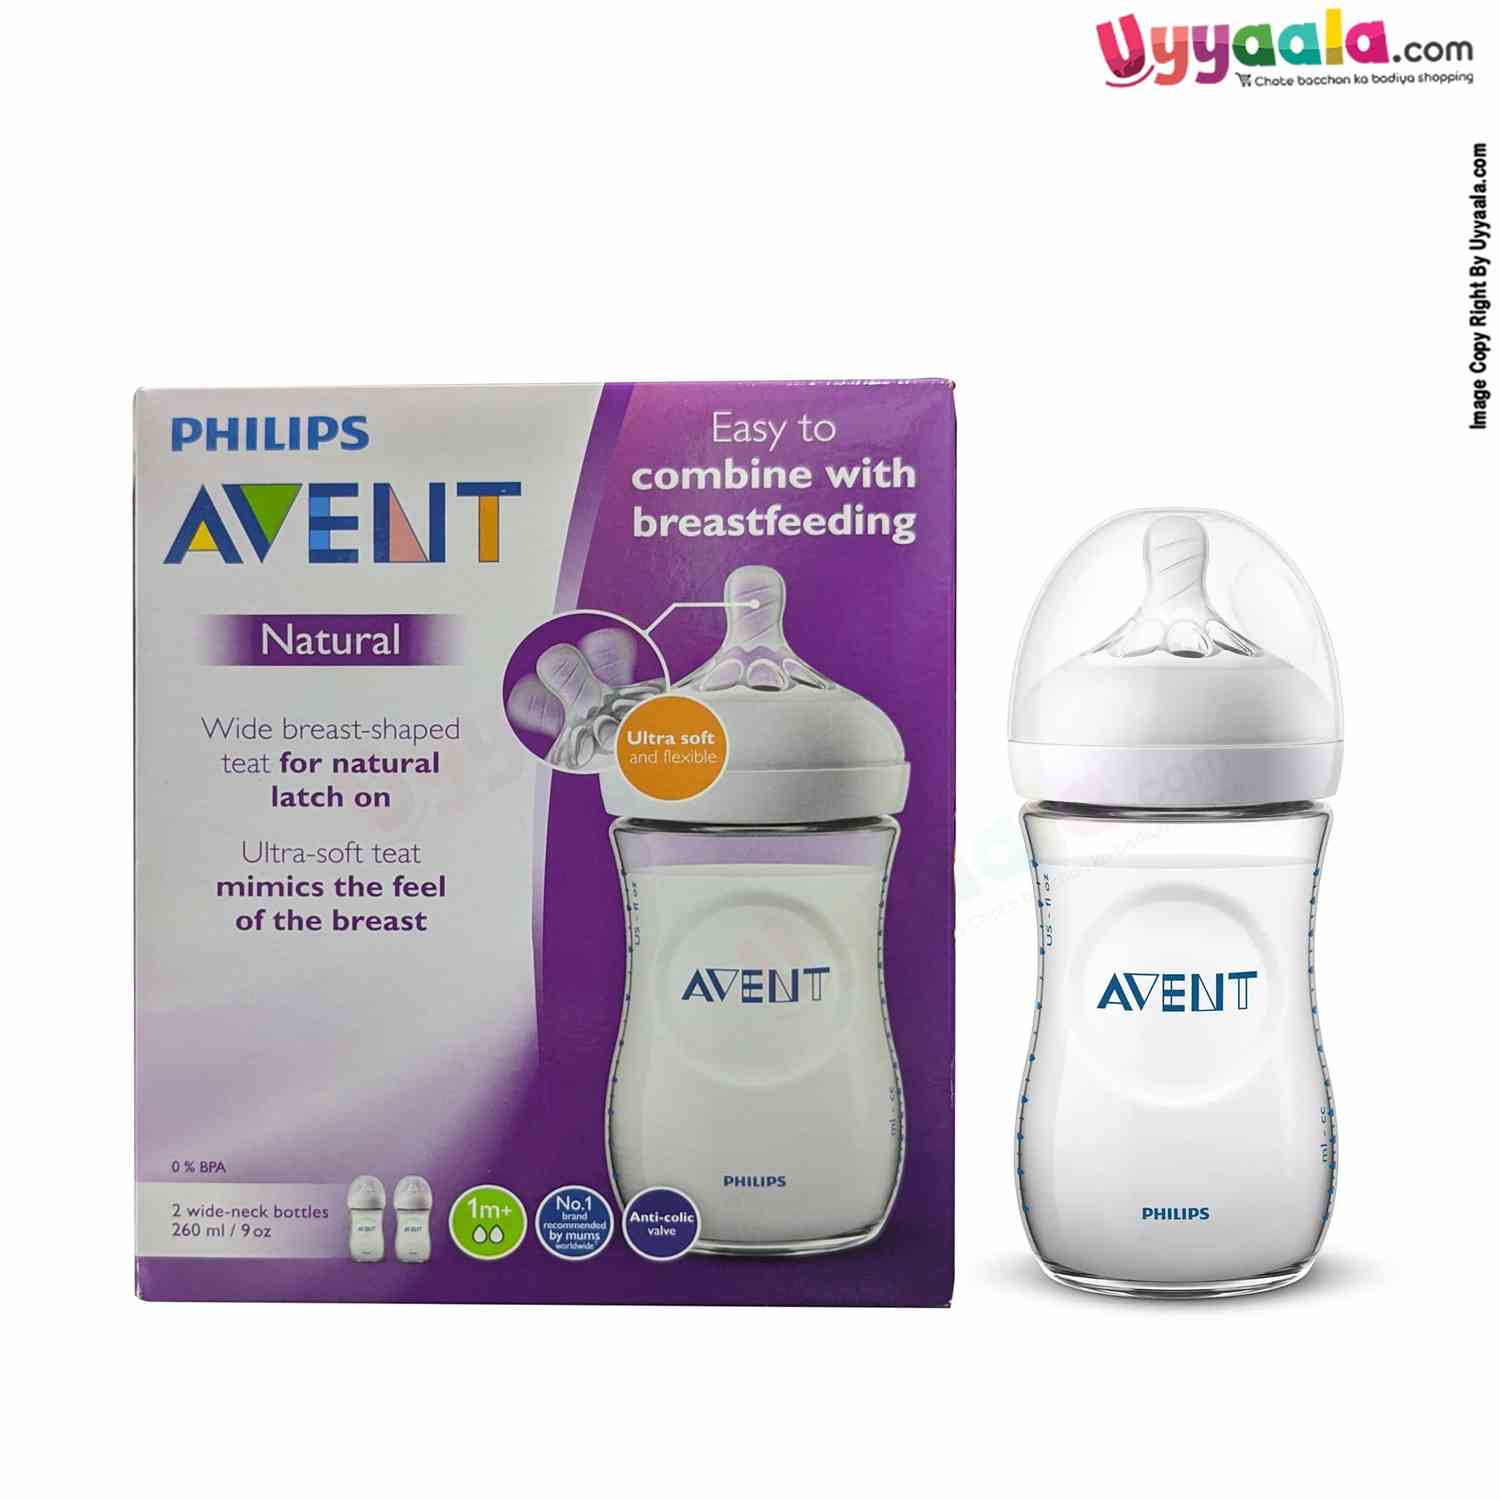 PHILIPS AVENT Baby feeding bottle with teat, Twin pack - 260ml, 1+m